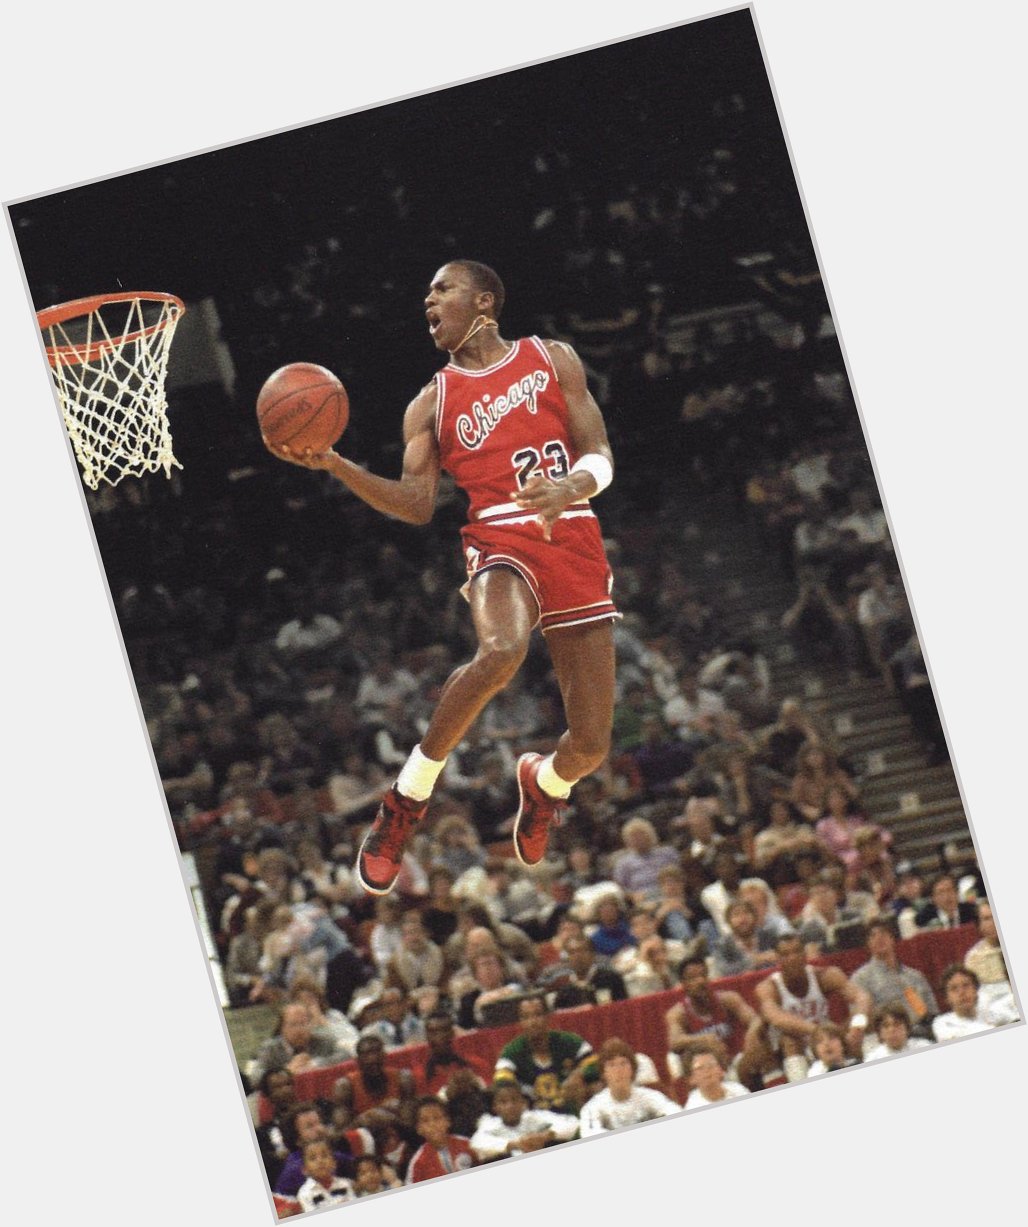 I thought Jordans and a gold chain was living it up Happy Birthday Michael Jordan 